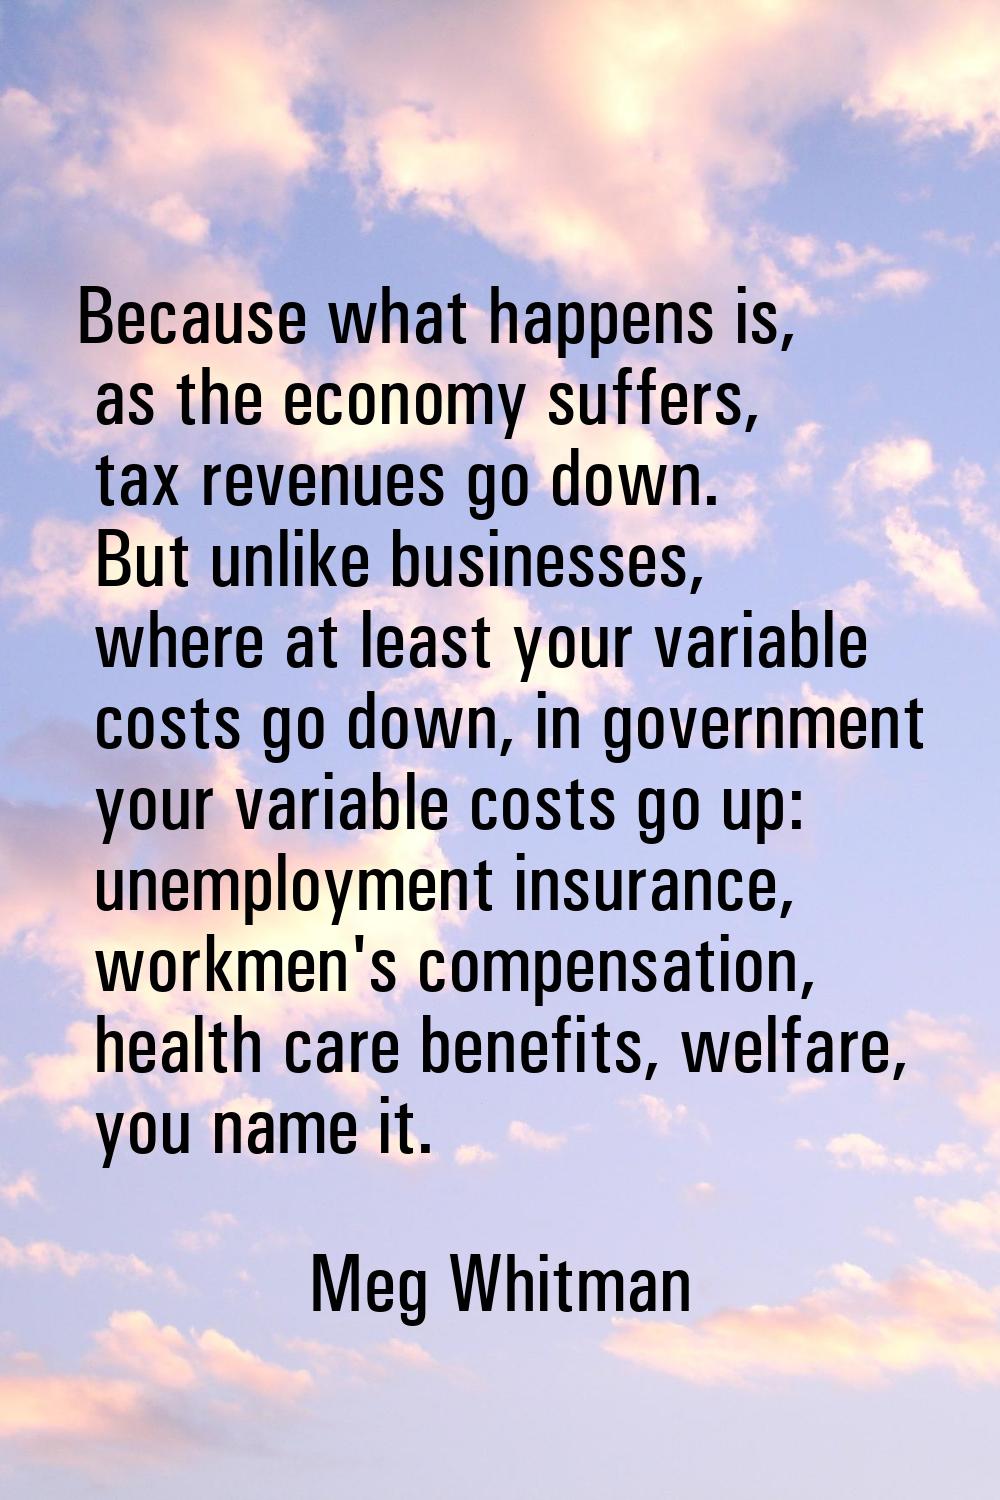 Because what happens is, as the economy suffers, tax revenues go down. But unlike businesses, where